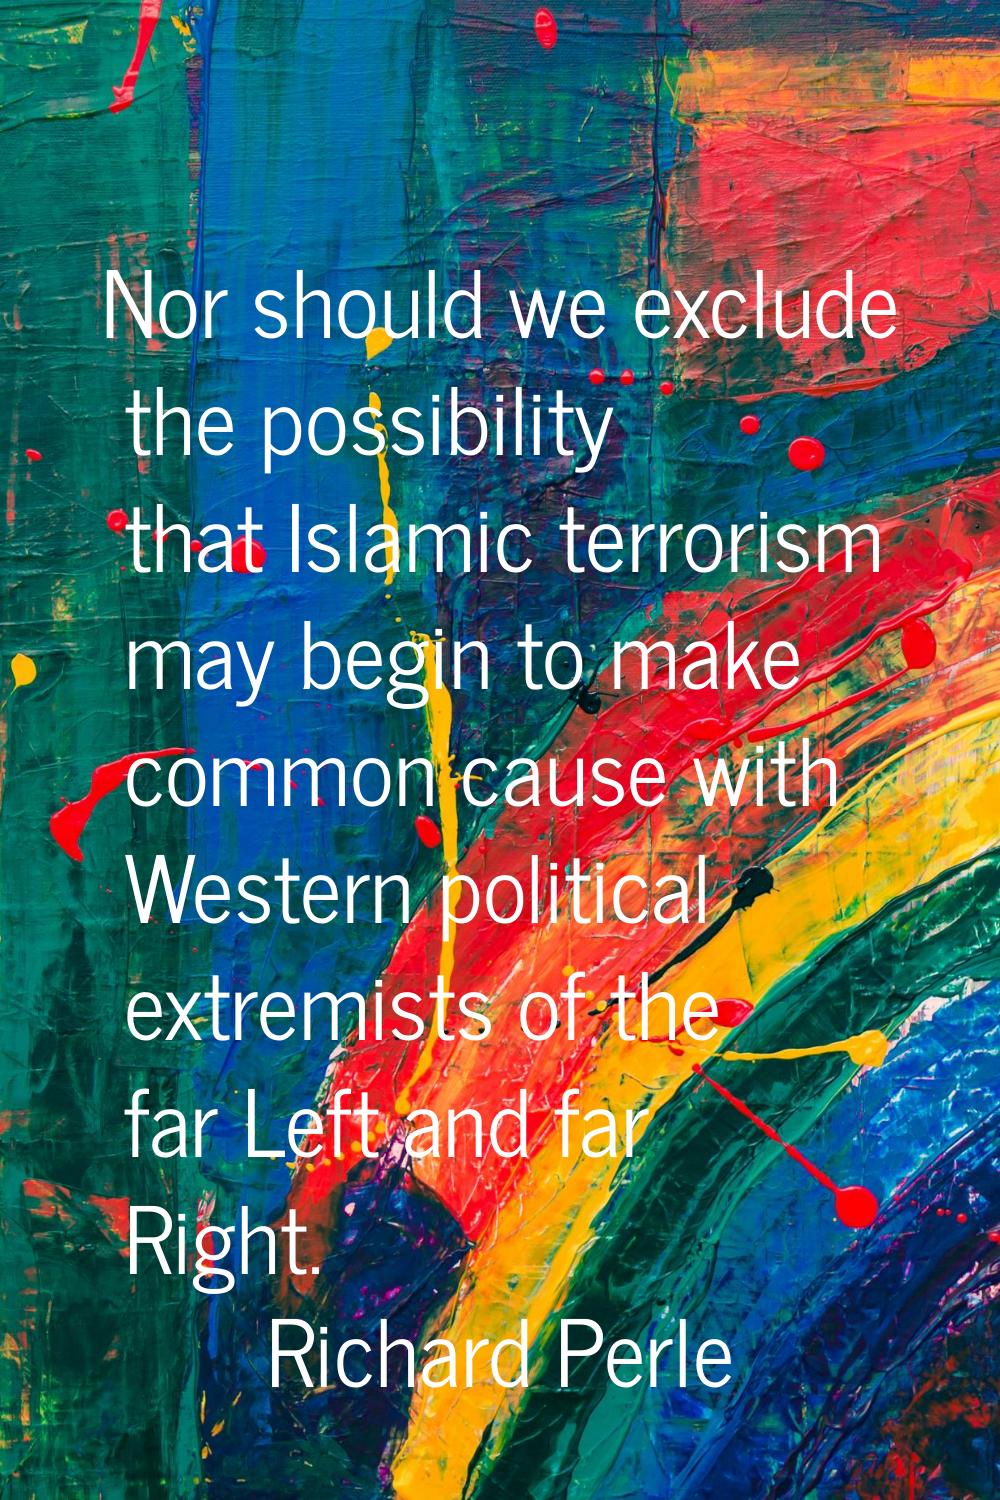 Nor should we exclude the possibility that Islamic terrorism may begin to make common cause with We